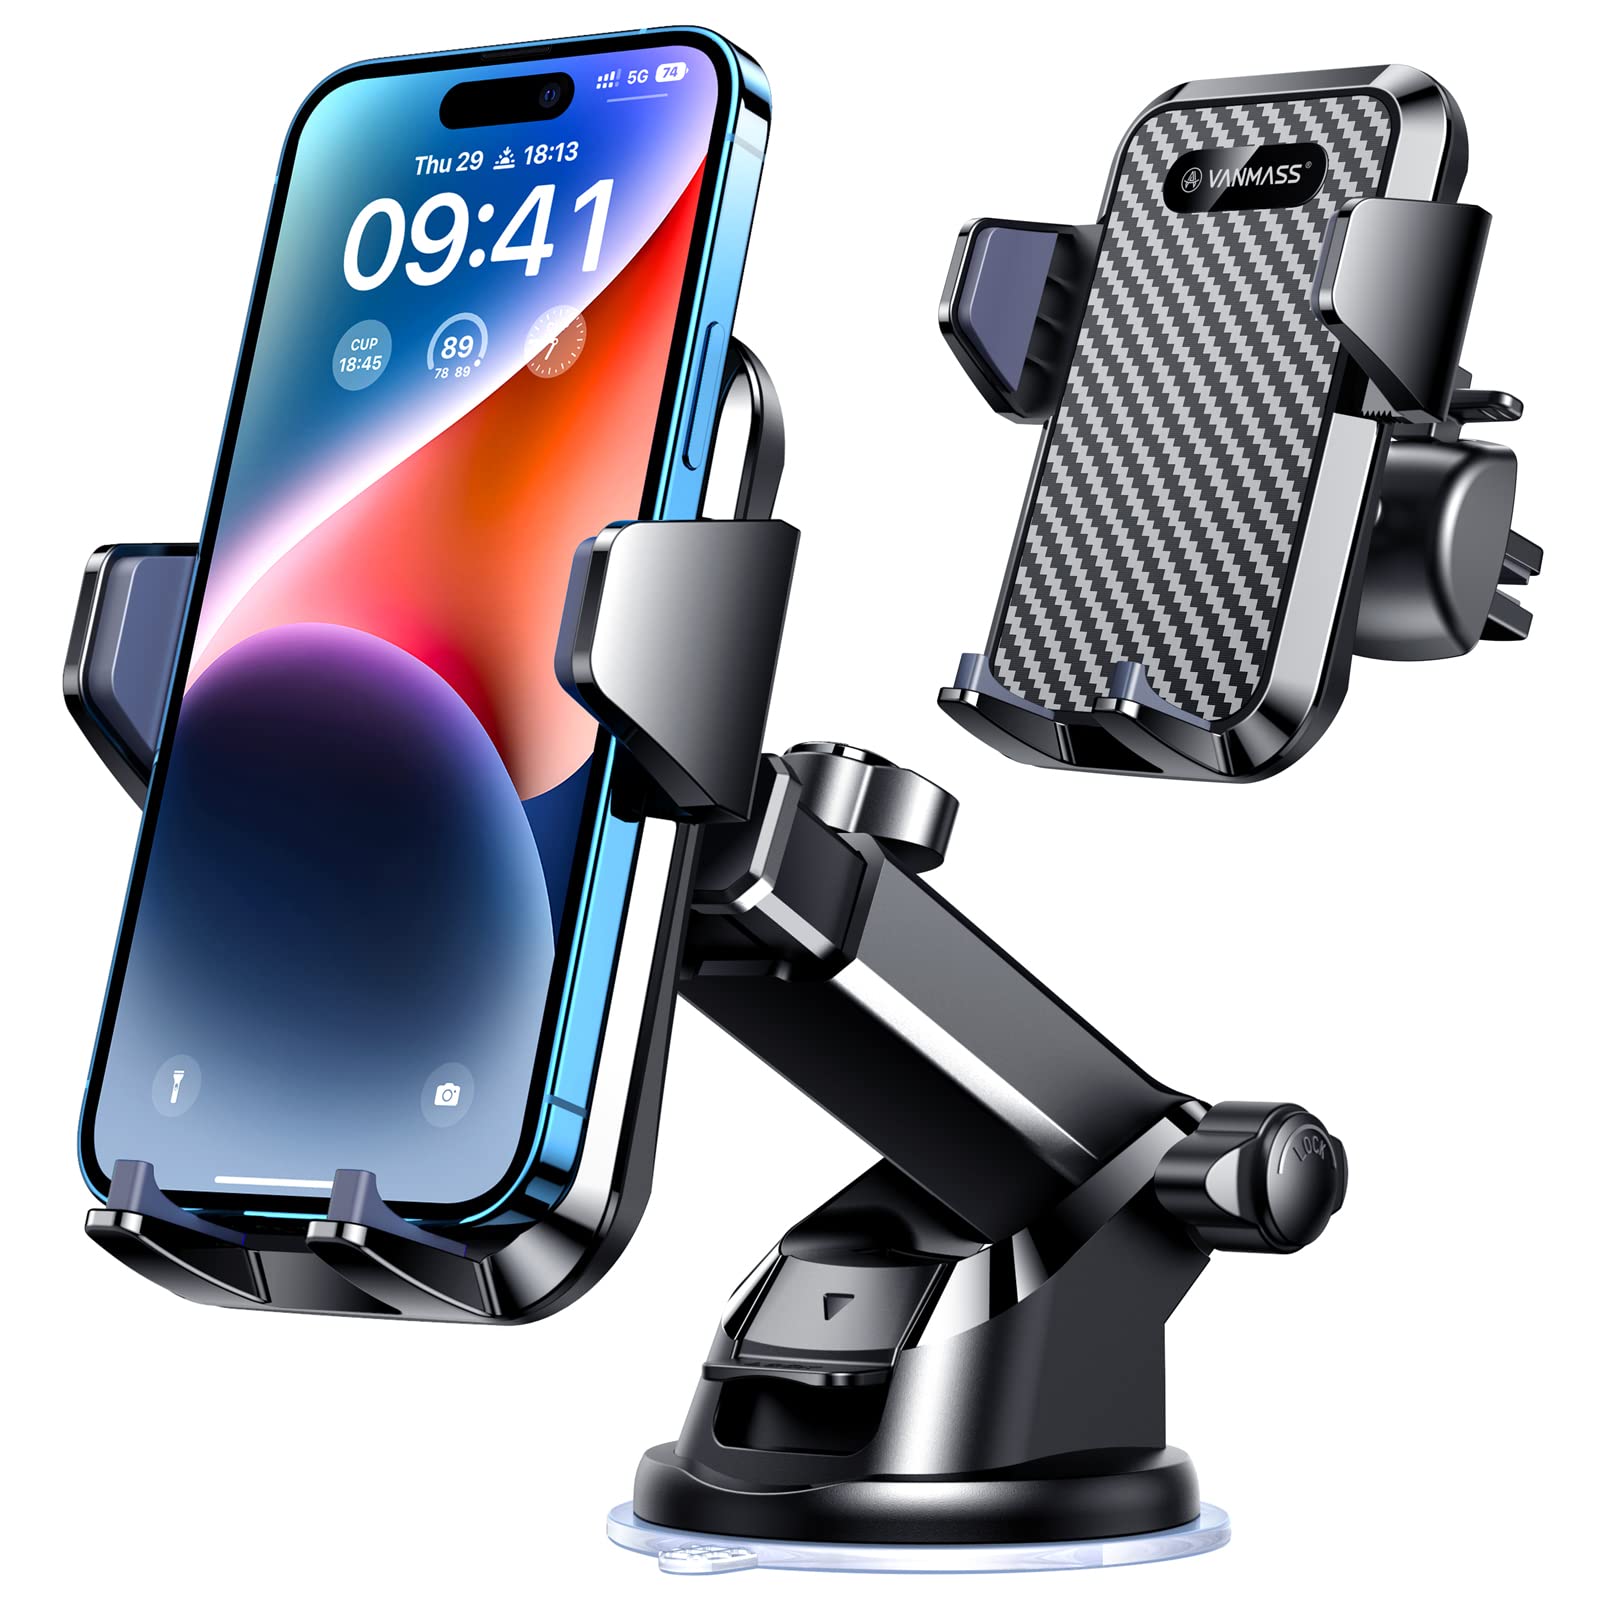 VANMASS Universal Car Phone Mount,【Patent & Safety Certs】 Upgraded Handsfree Stand, Phone Holder for Car Dashboard Windshield Vent, Compatible iPhone 14 13 12 Samsung Android & Pickup Truck